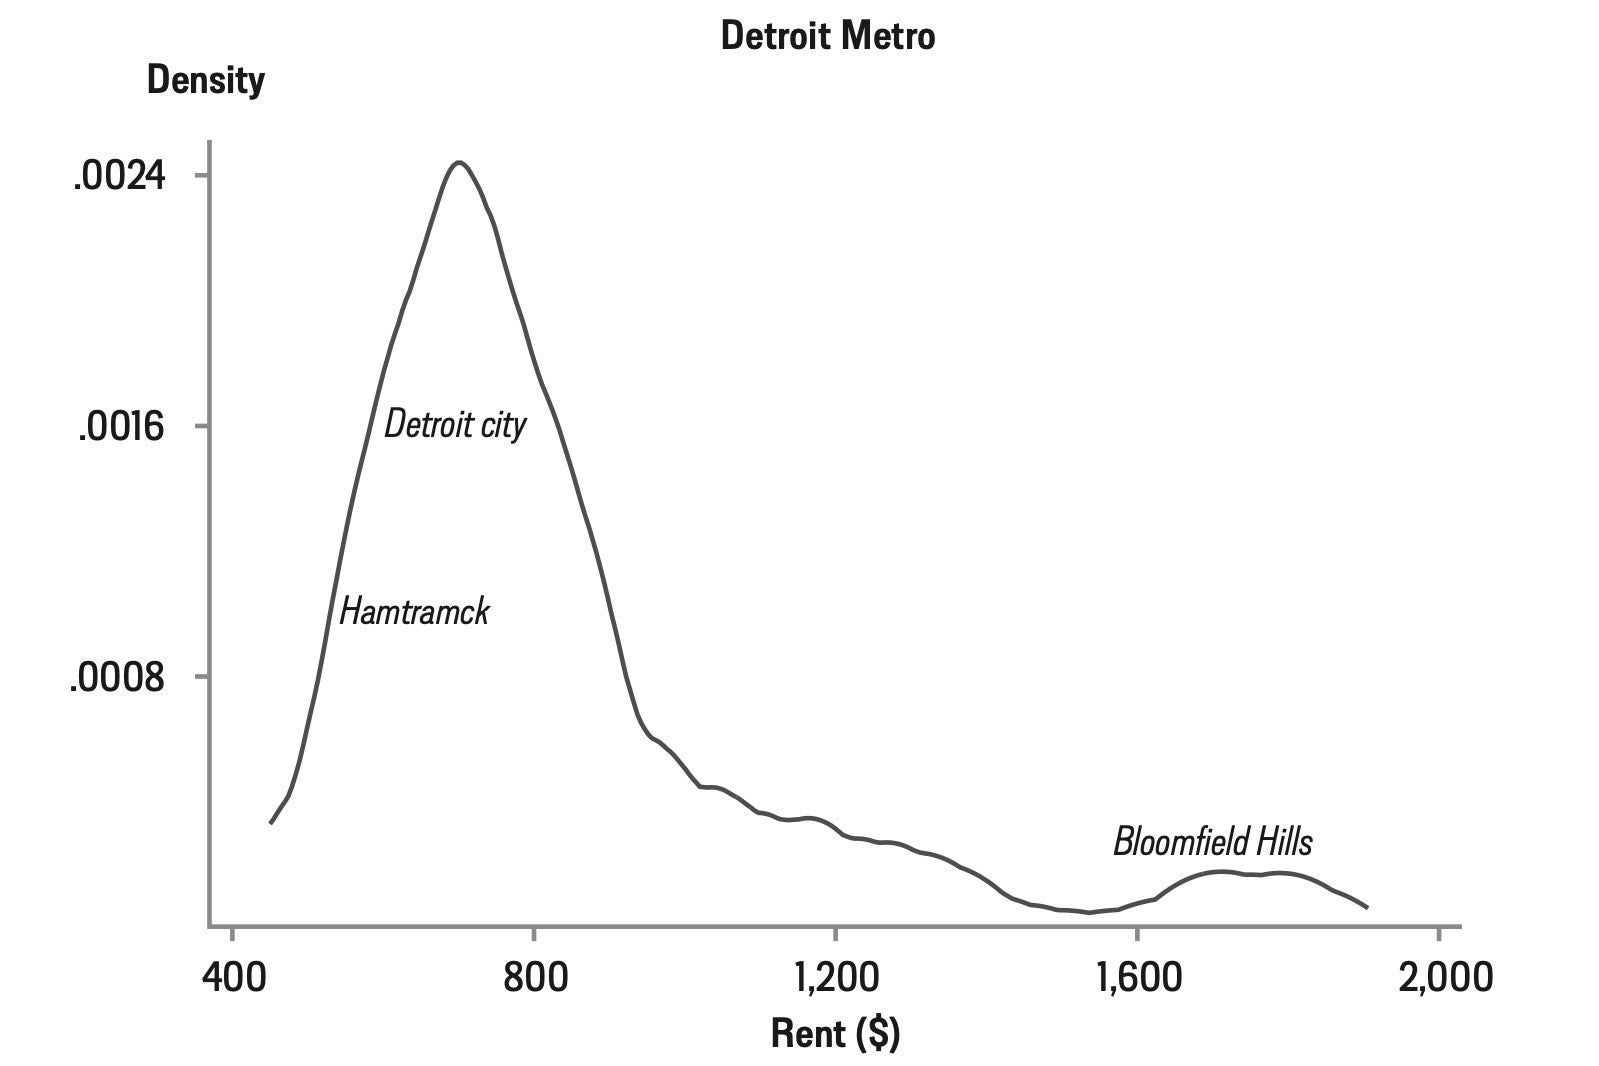 A curve showing the density of housing in Detroit neighborhoods vs. rent.